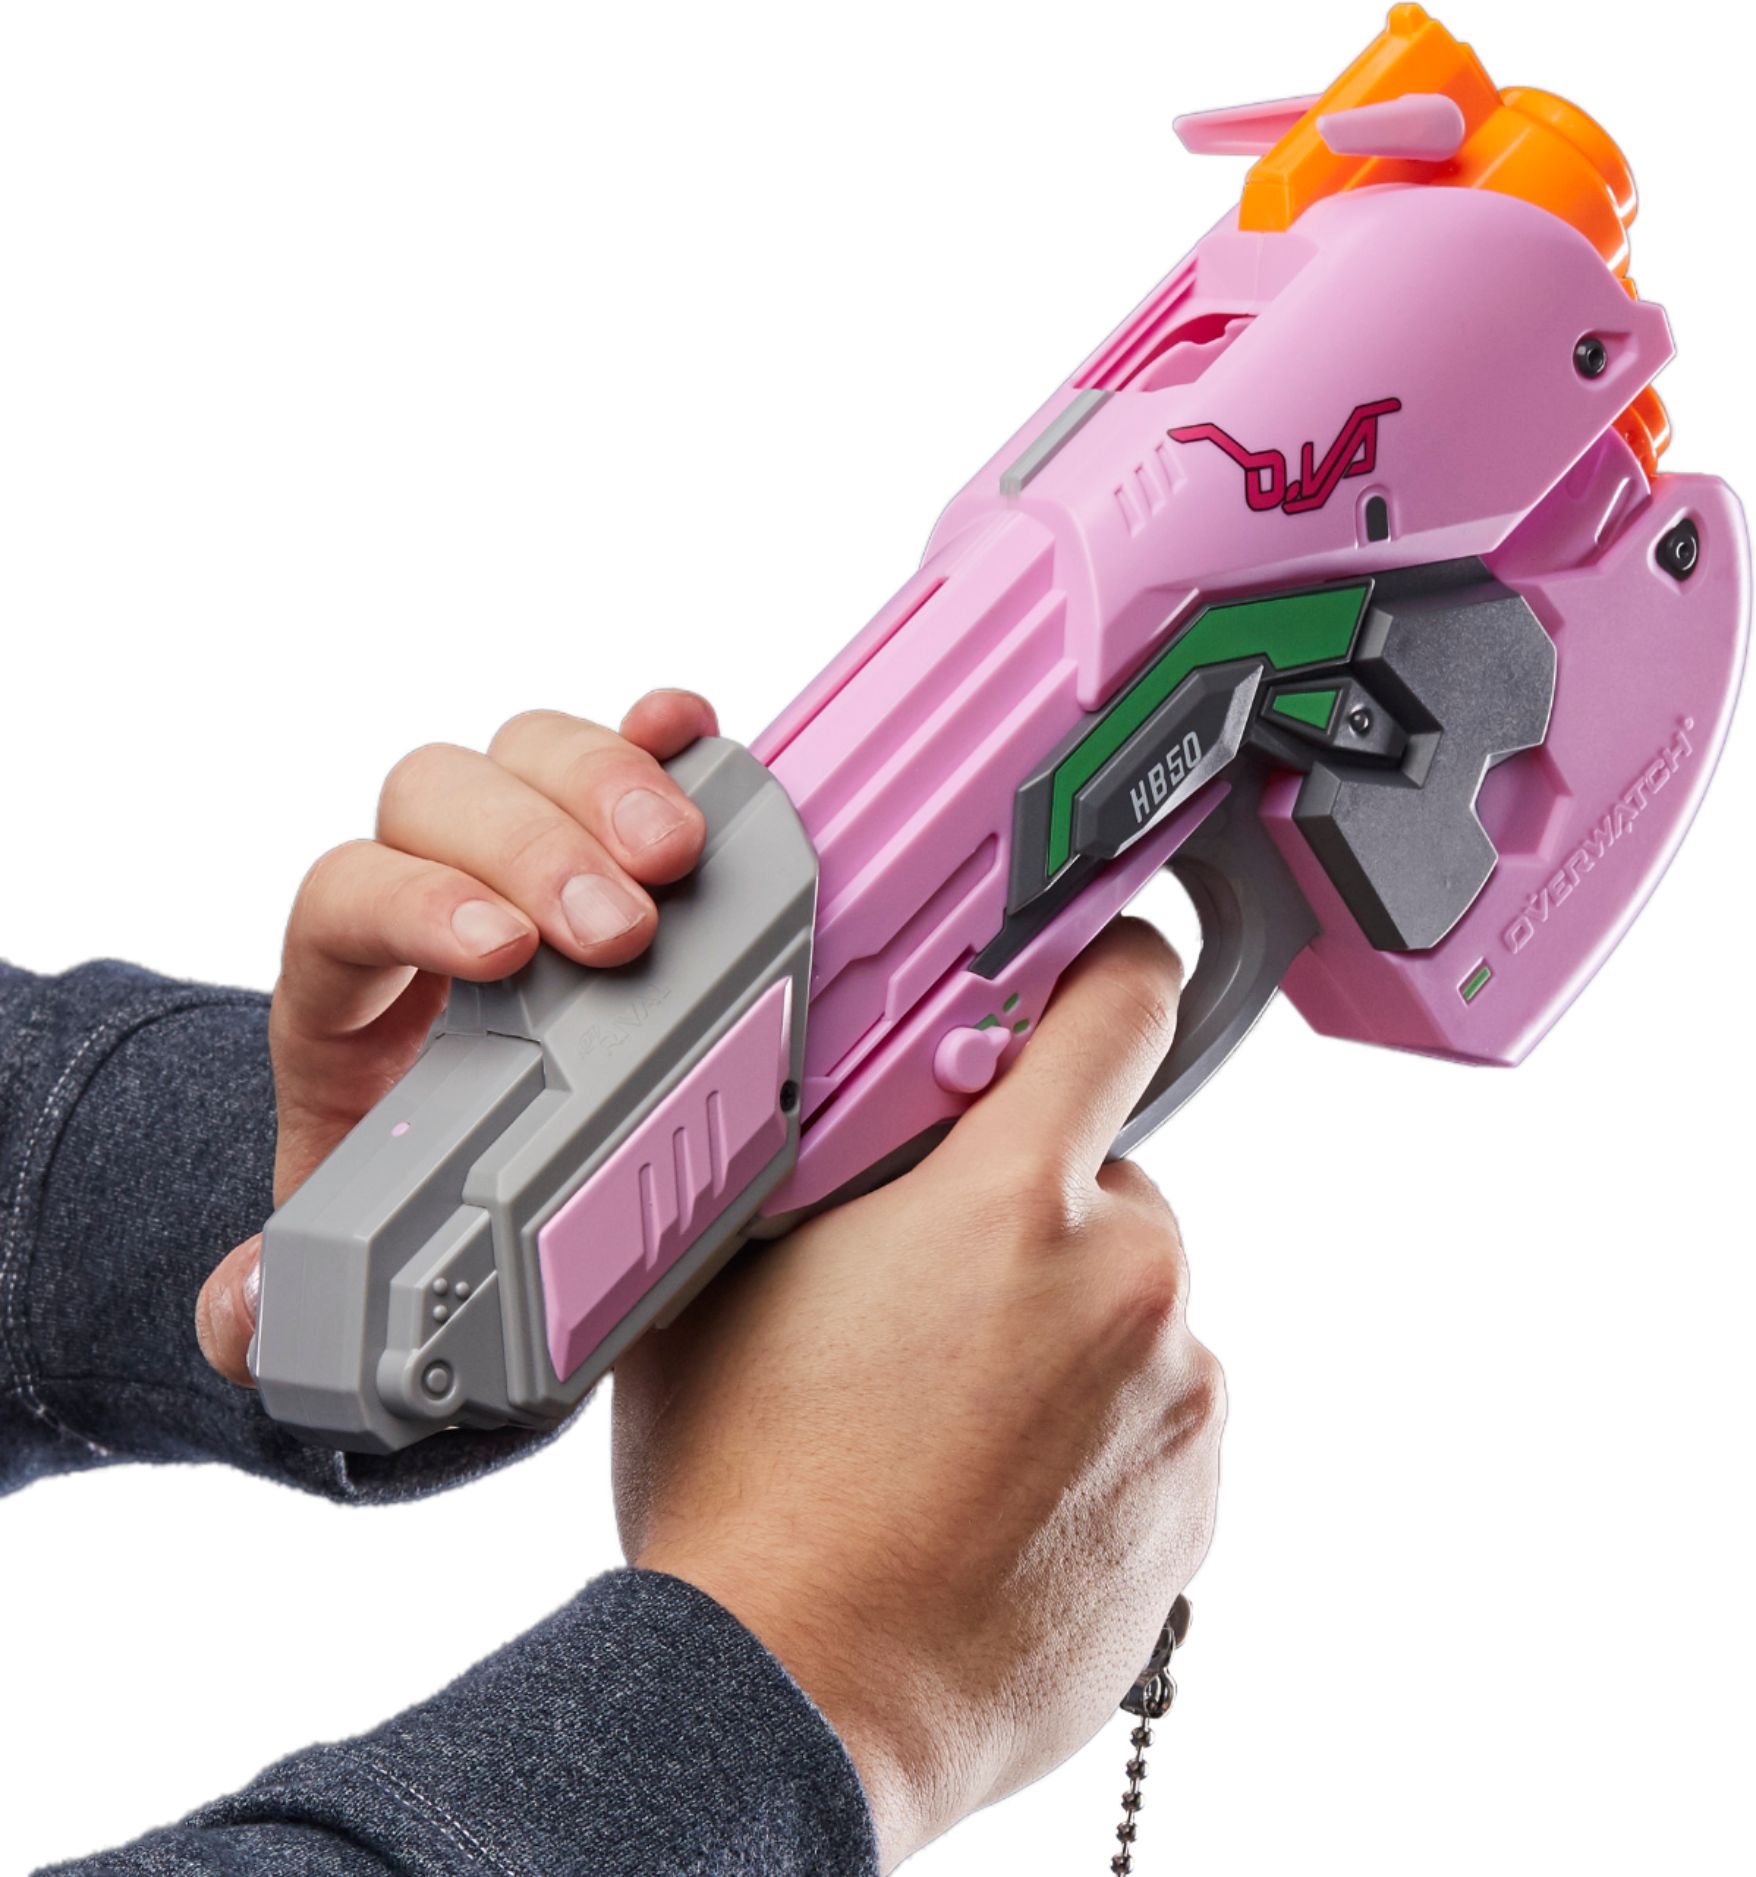 Toy Gun Fire Fight NERF Rival Overwatch D.VA Blaster 3 Overwatch Rounds Ages 14 